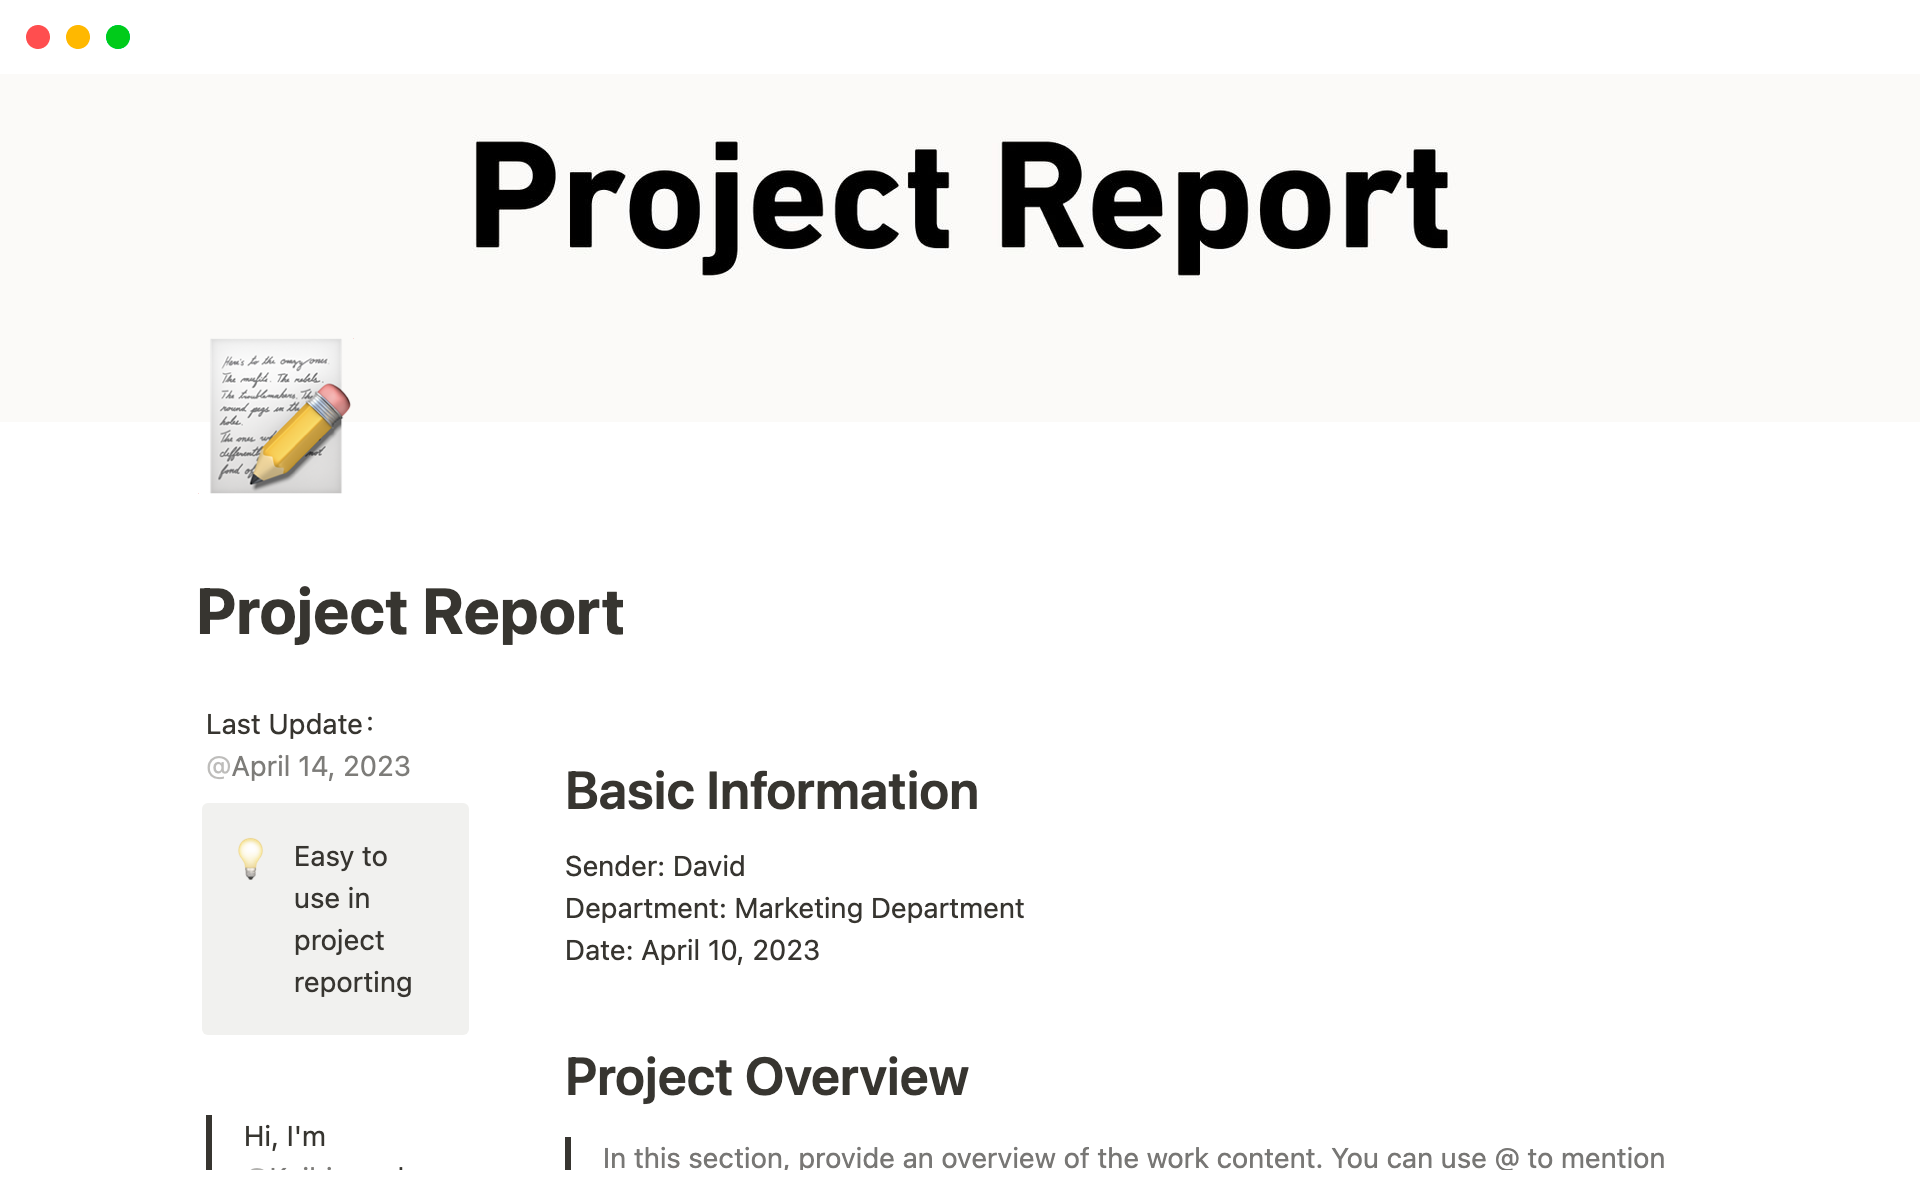 Easy to use in project reporting